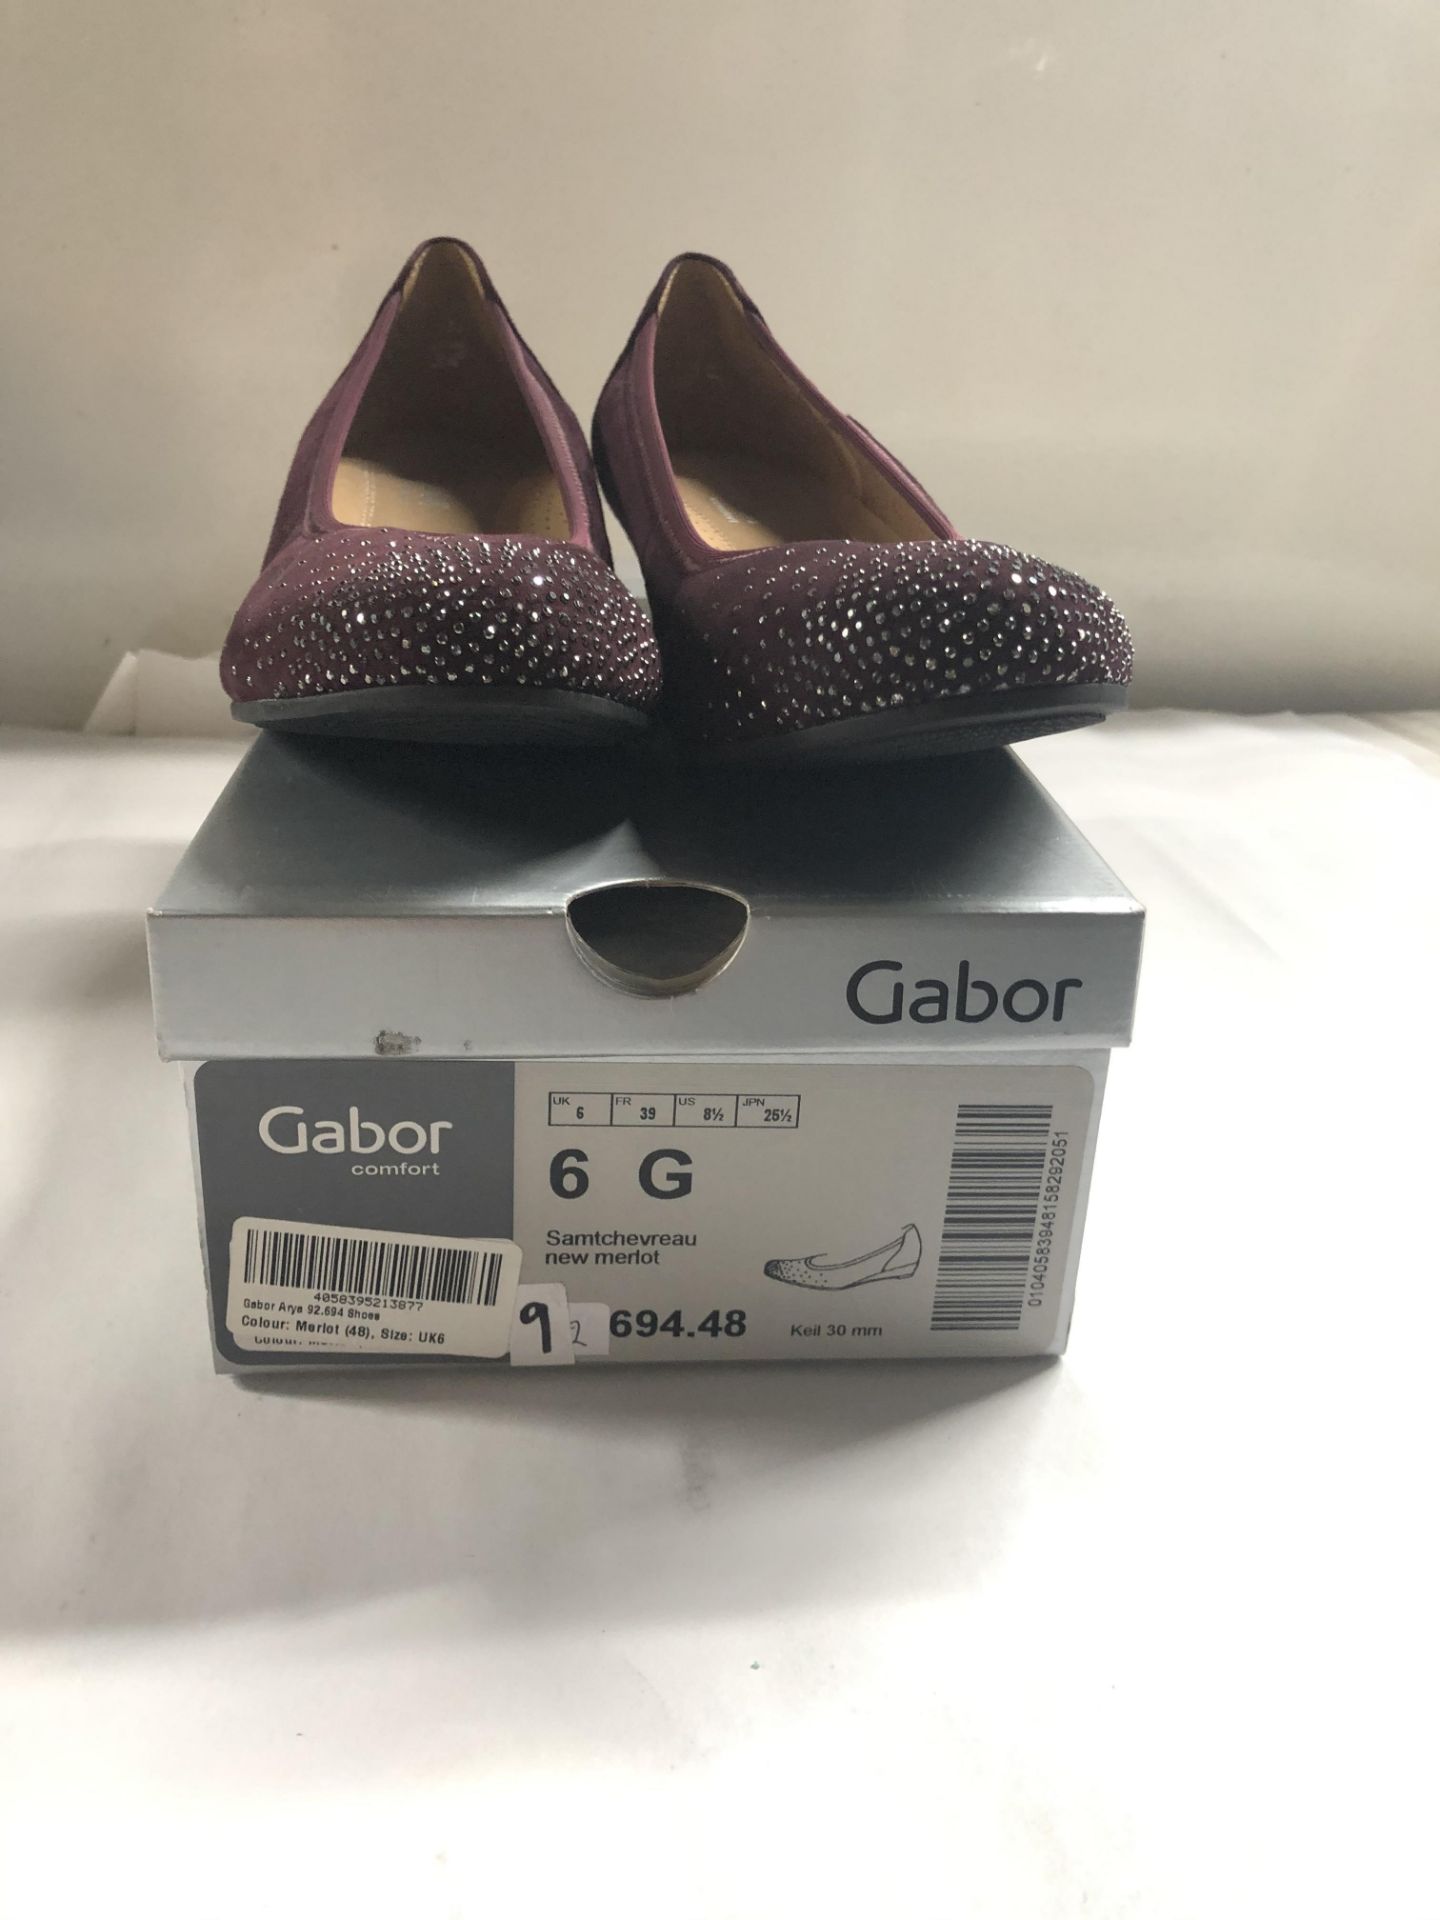 Gabor Shoes - Image 2 of 3